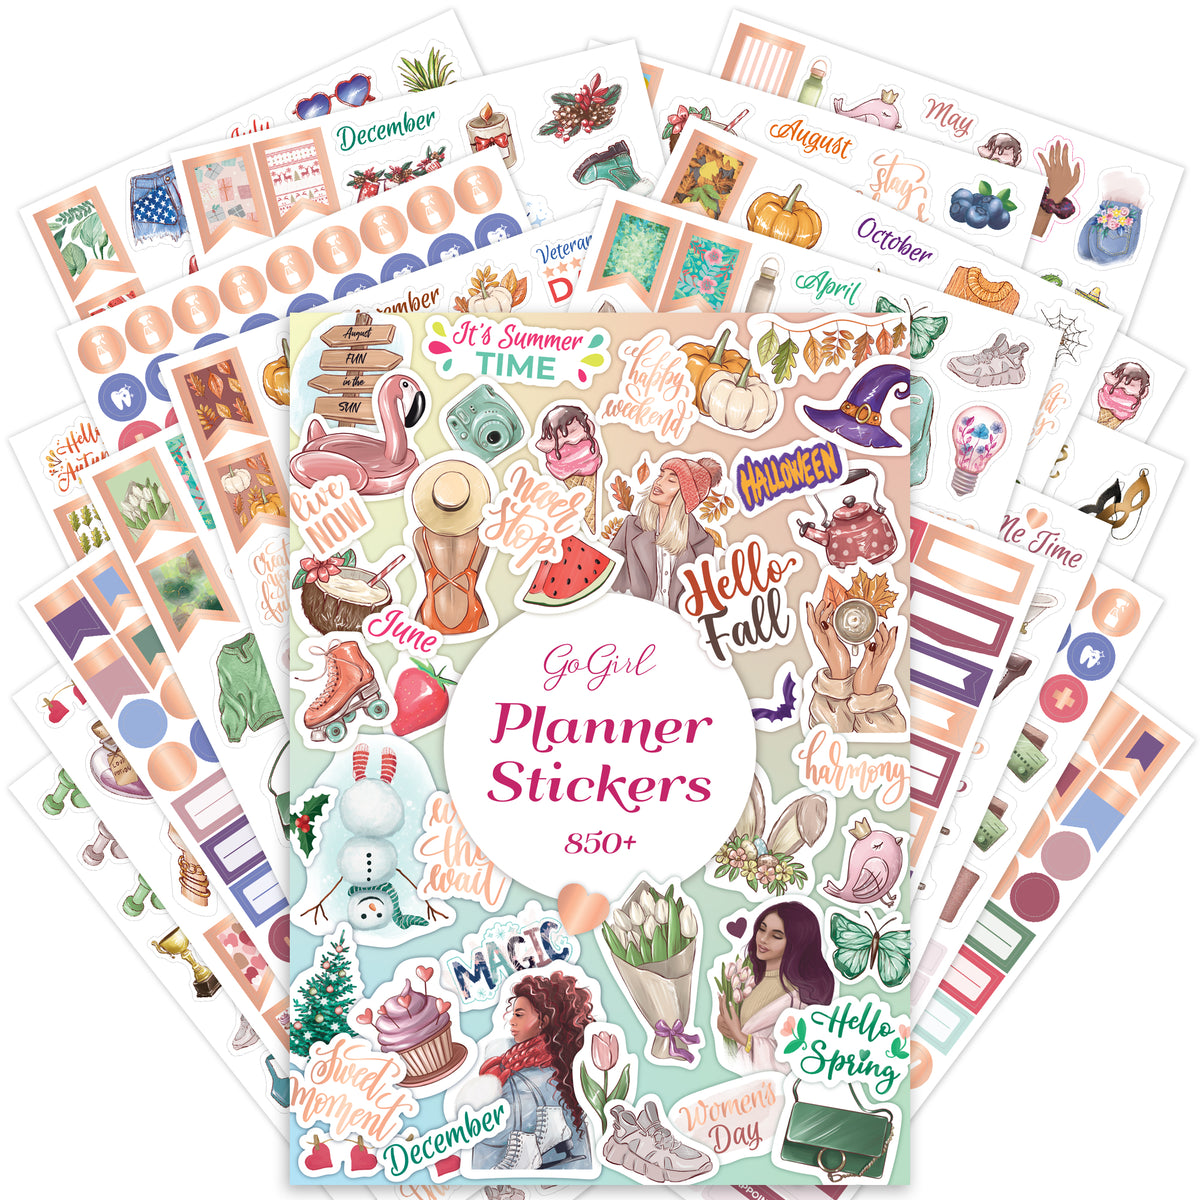 21 Day Fix Meal Plan Planner Stickers – PlannerChickDesigns